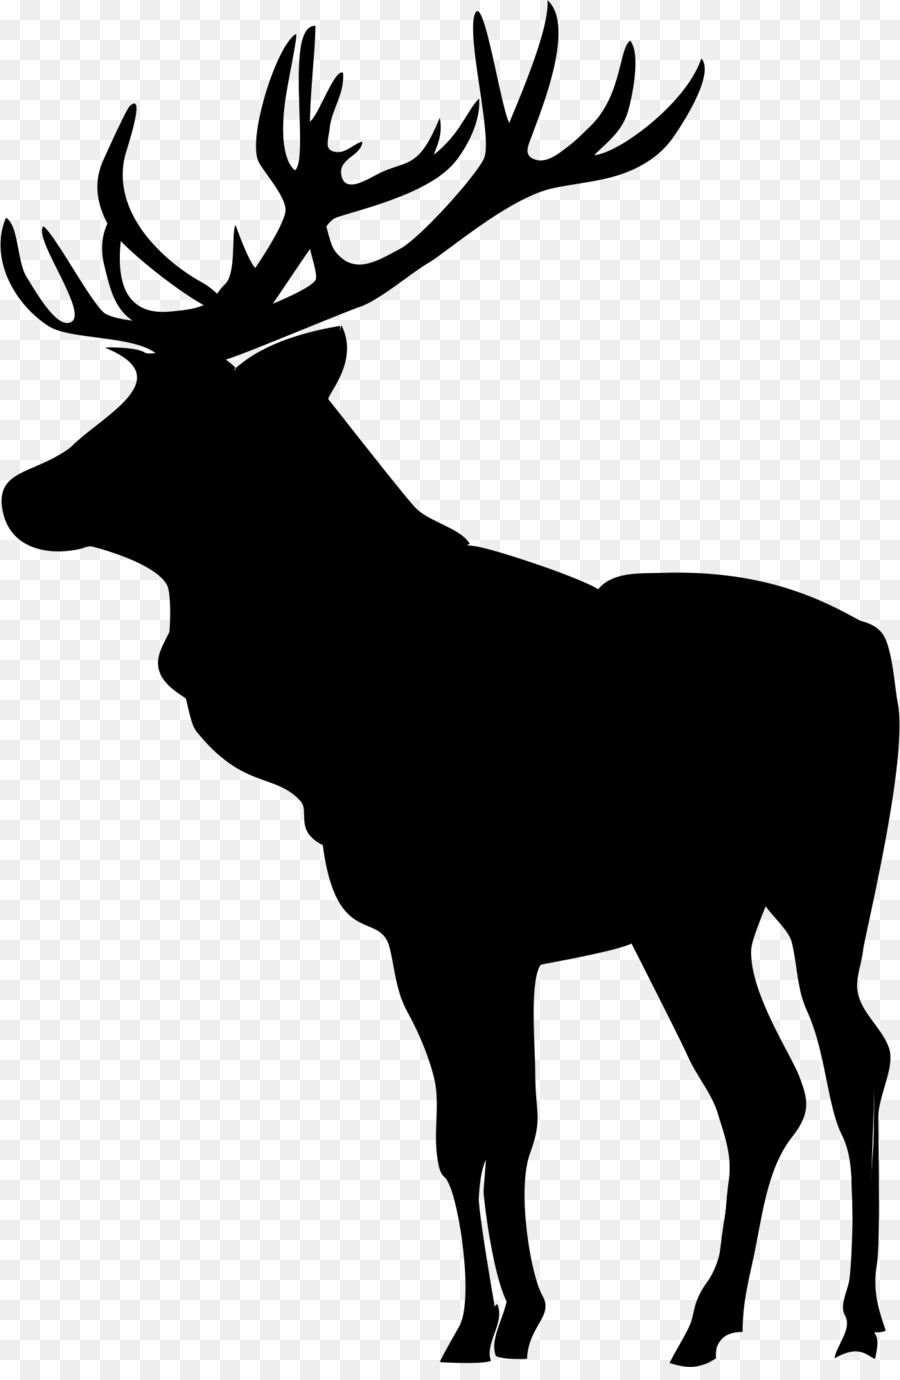 Free Deer Silhouette Svg Download Free Clip Art Free Clip Art On Clipart Library